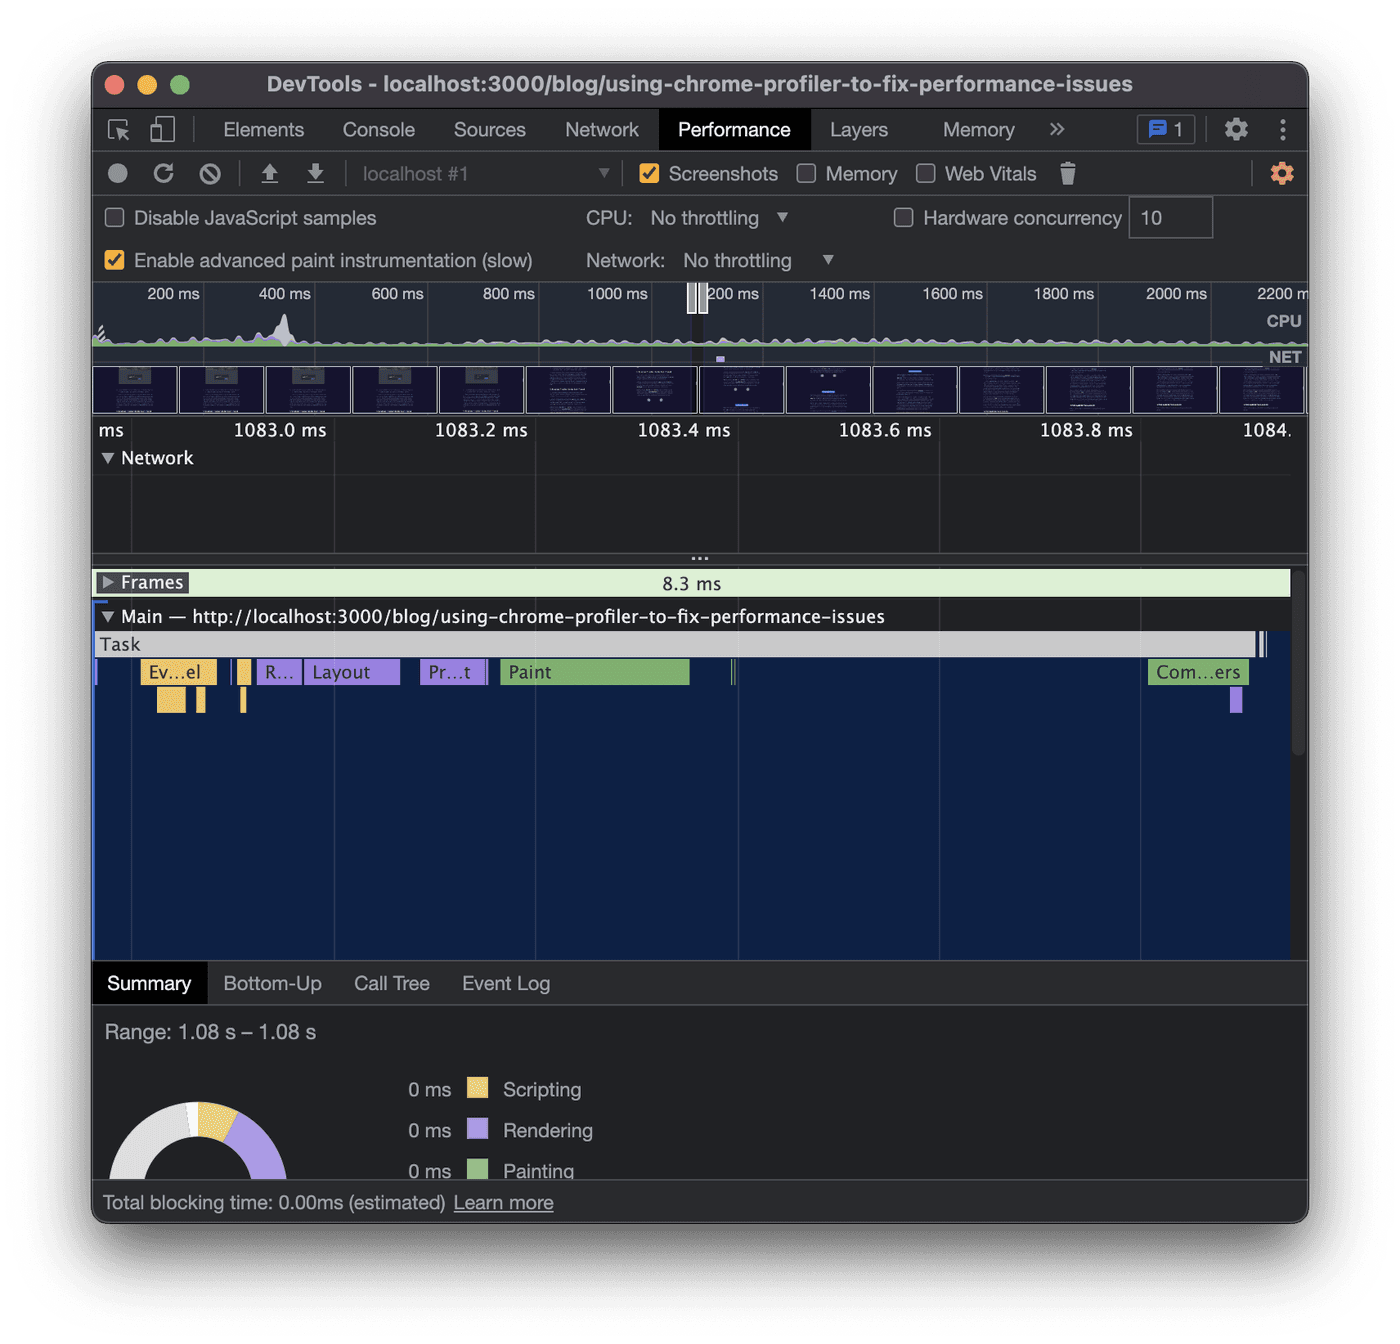 Chrome DevTools performance panel with profiling results shown.